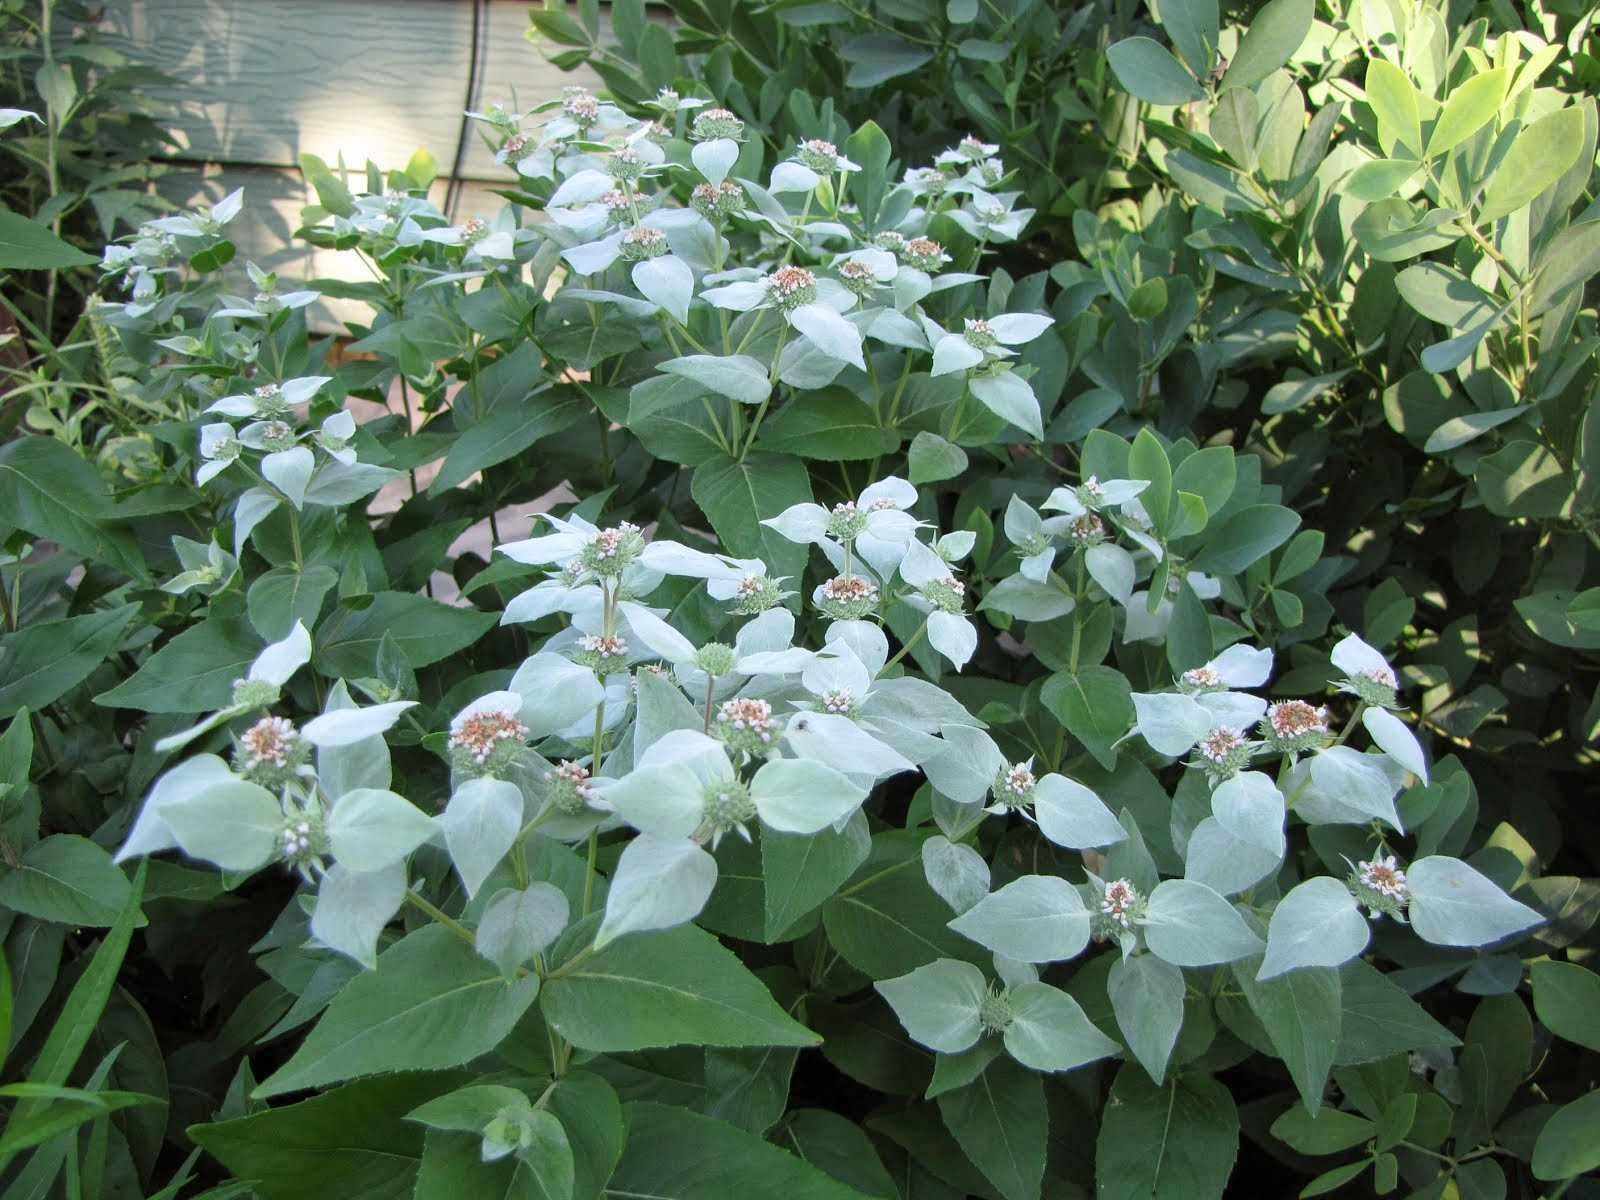 Short-toothed mountain mint